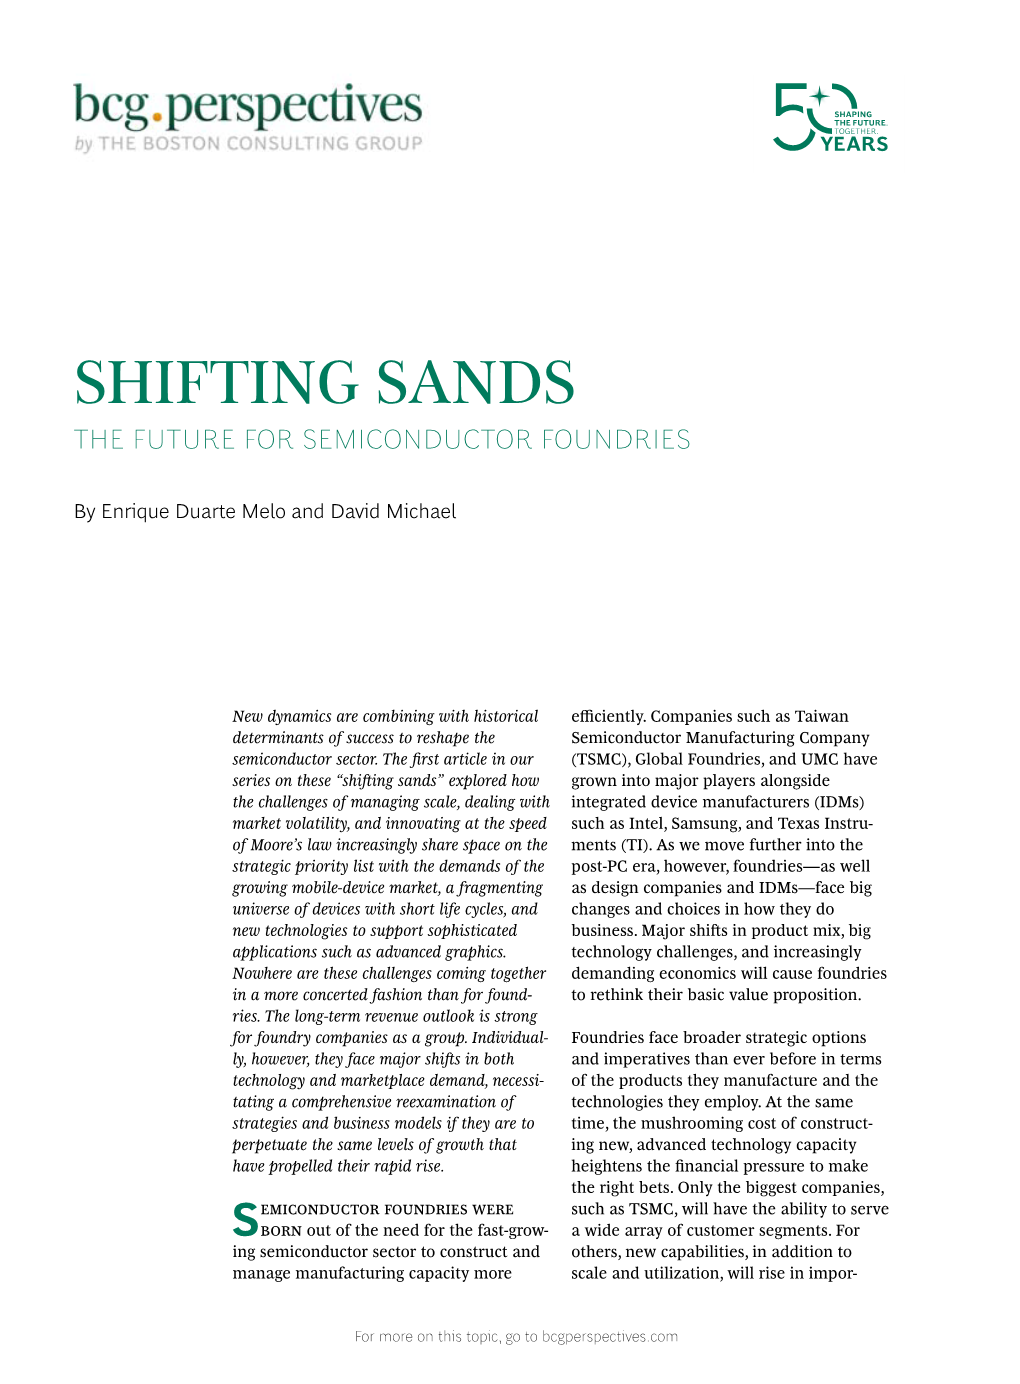 Shifting Sands the Future for Semiconductor Foundries